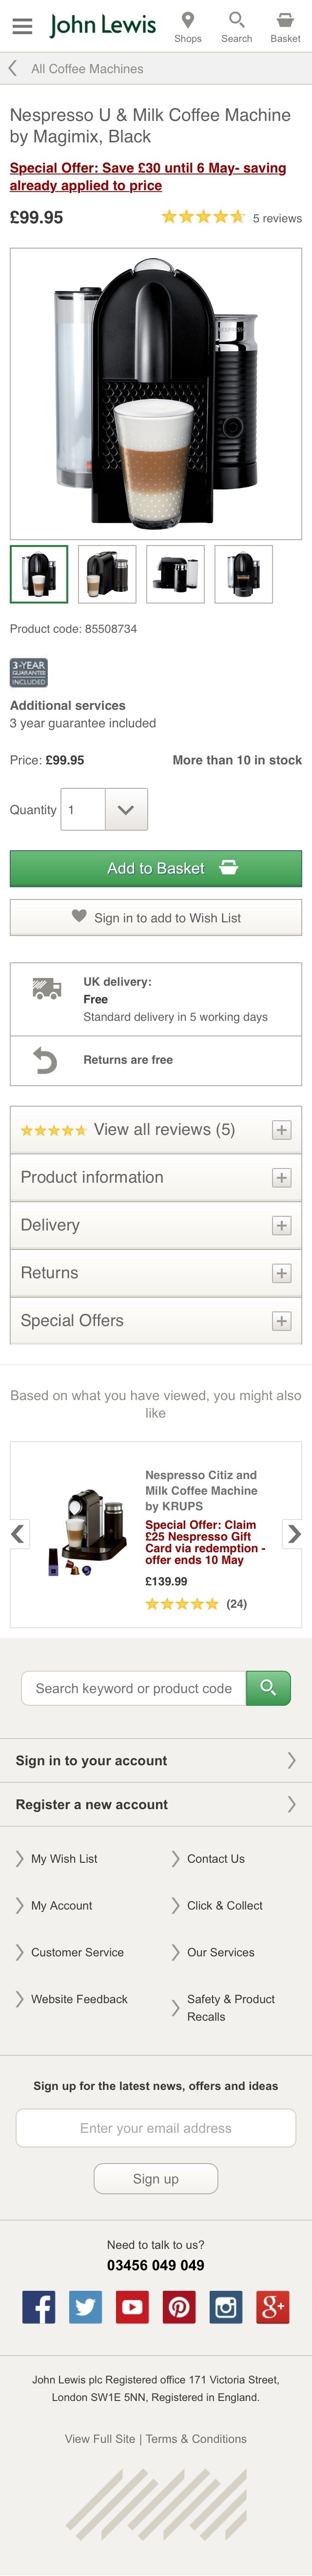 John Lewis mobile product page design example